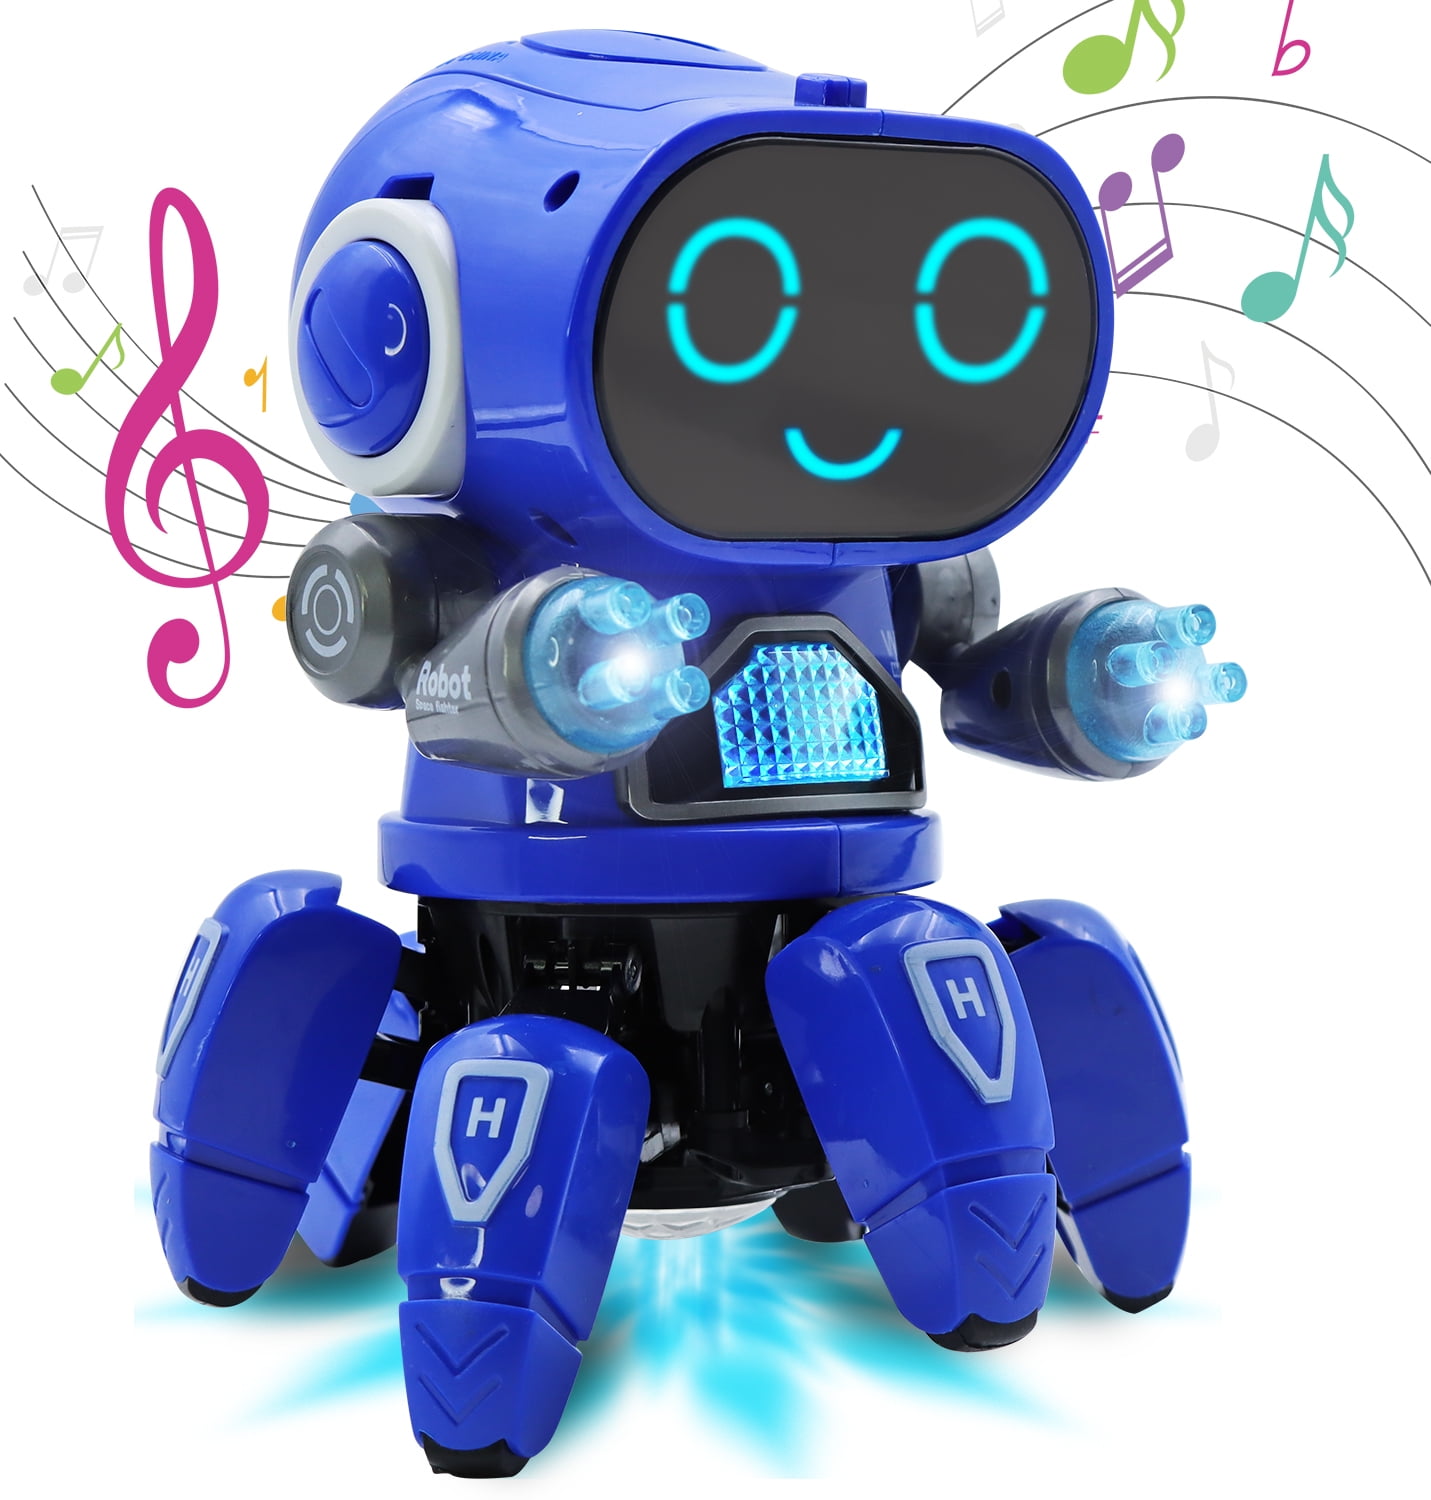 Lvelia Robot Toy for Kids, Electronic Walking Dancing RC Robot Toys with Flashing Lights and Music, Blue - Walmart.com